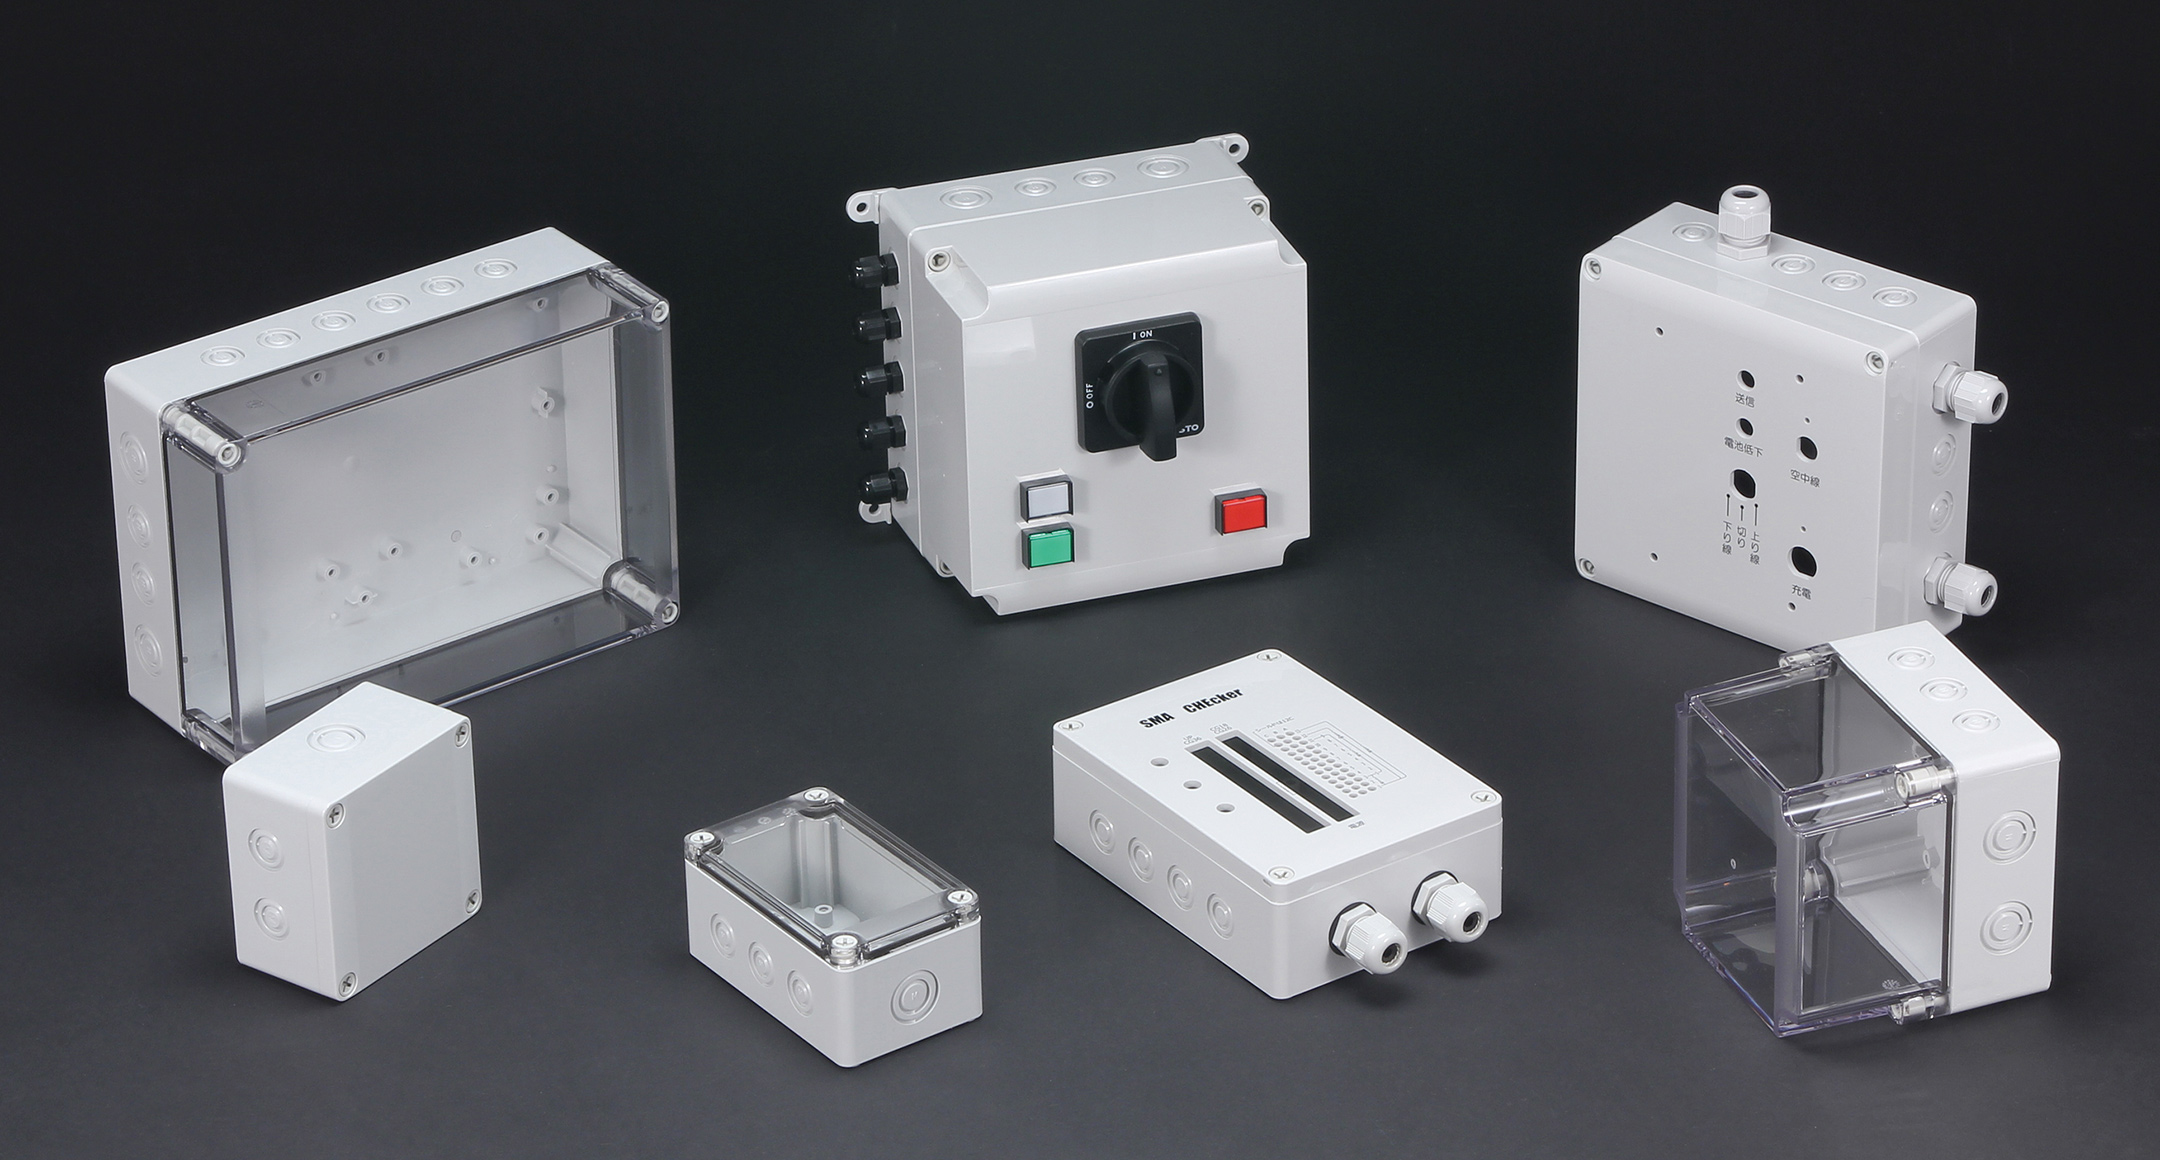 IP67 JUNCTION BOX with KNOCKOUTS - SPCM series